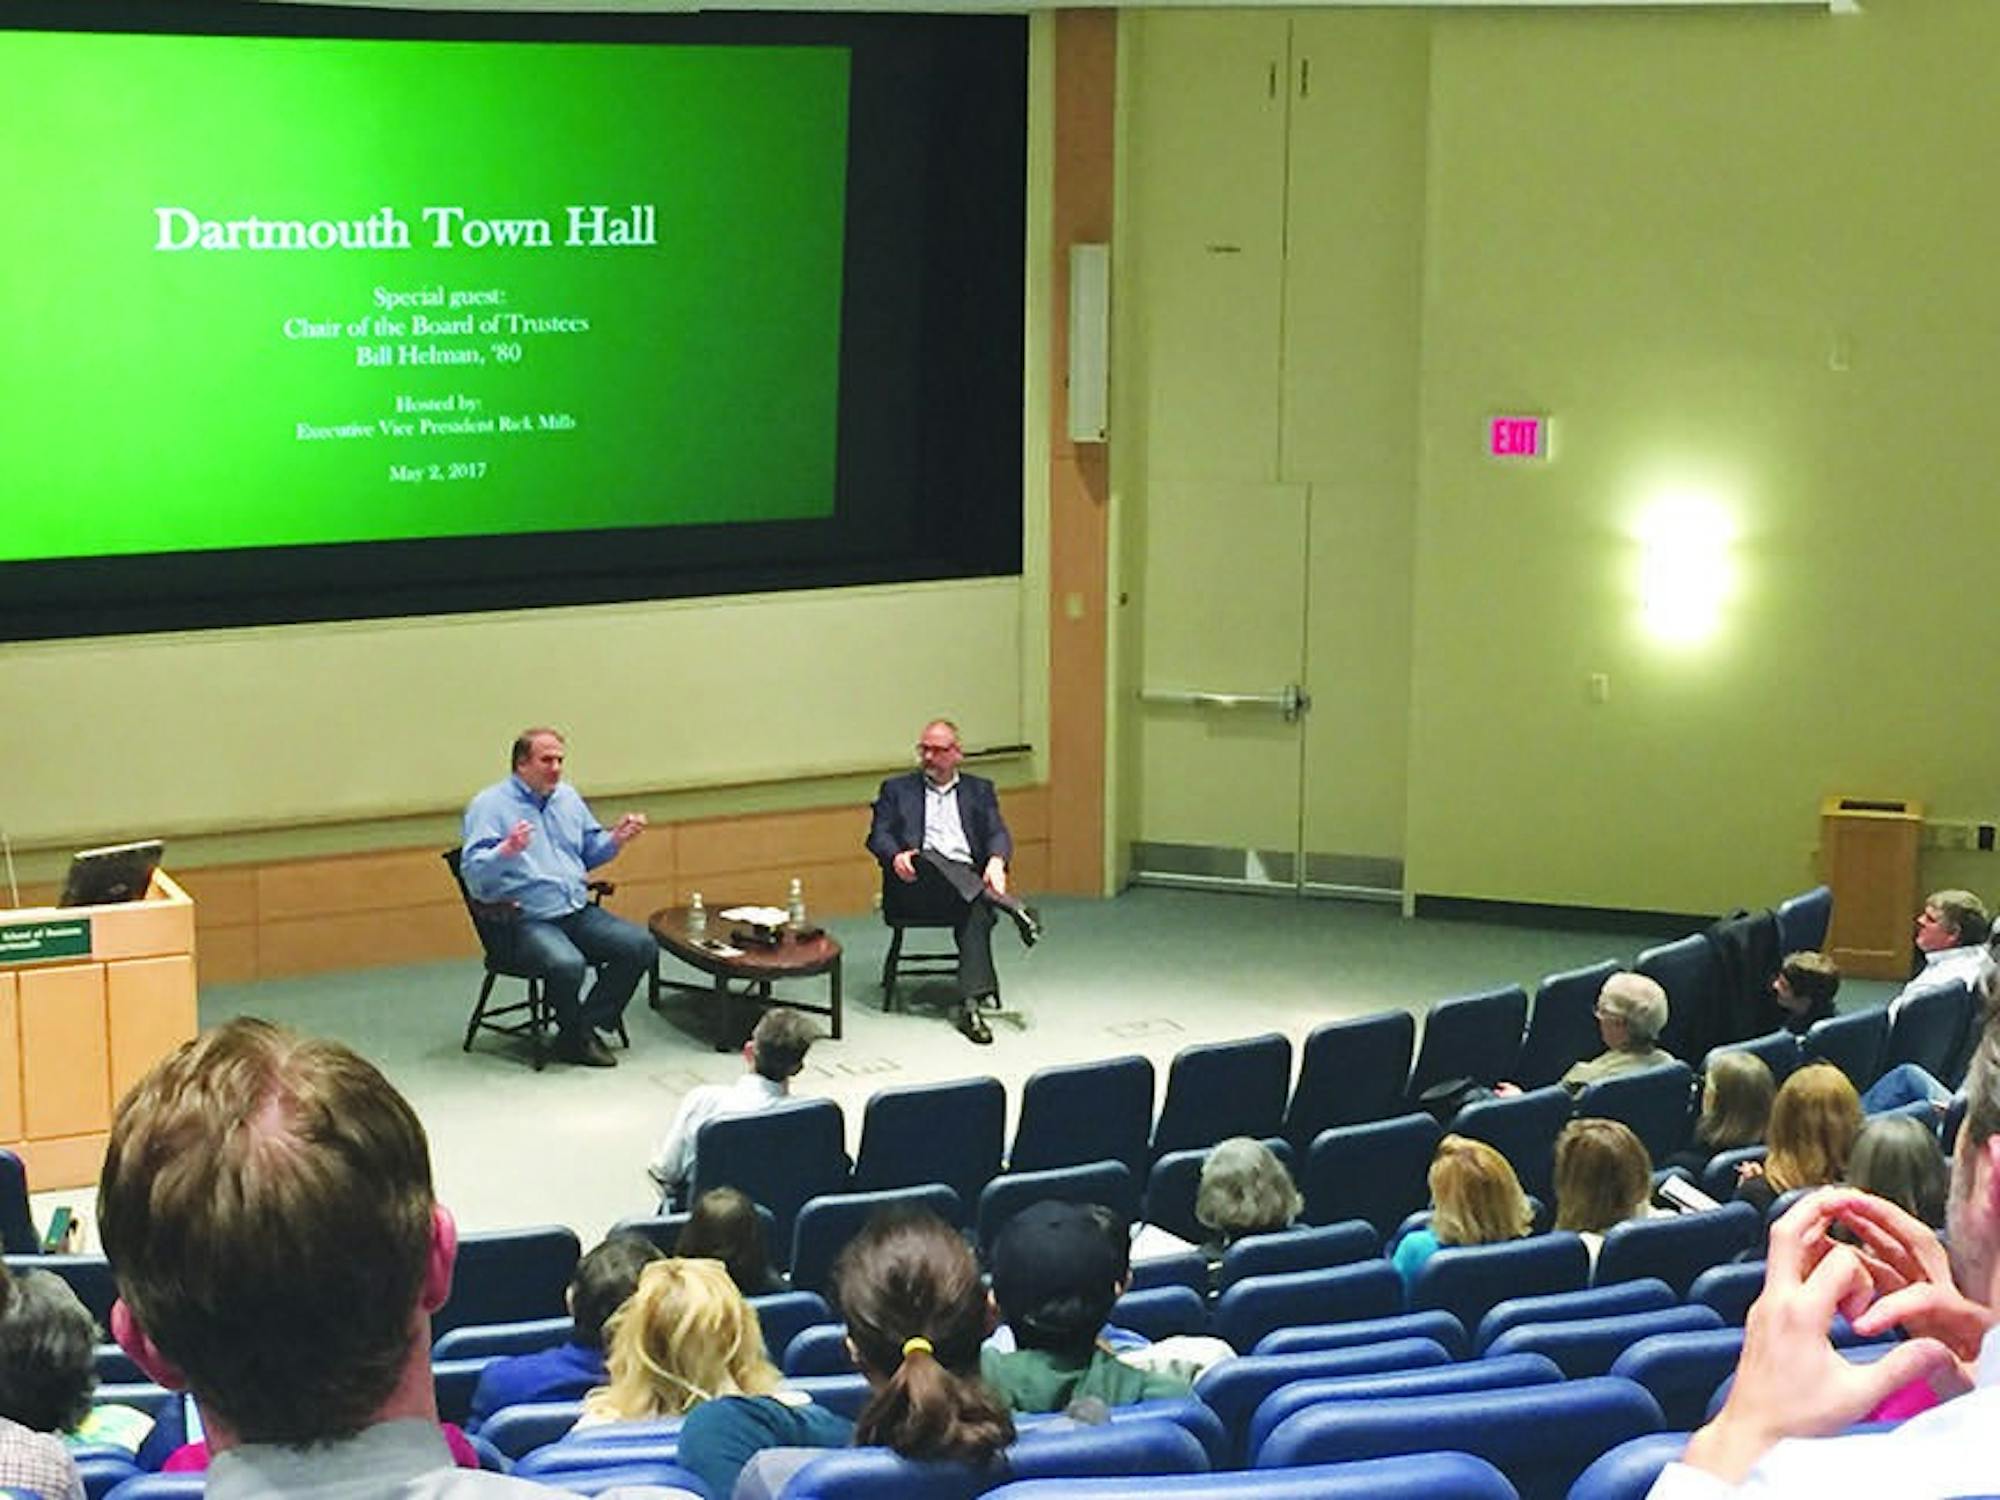 About 200 students and community members attended the town hall, which featured chair of the Board of Trustees Bill Helman '80 and executive vice president Rick Mills.